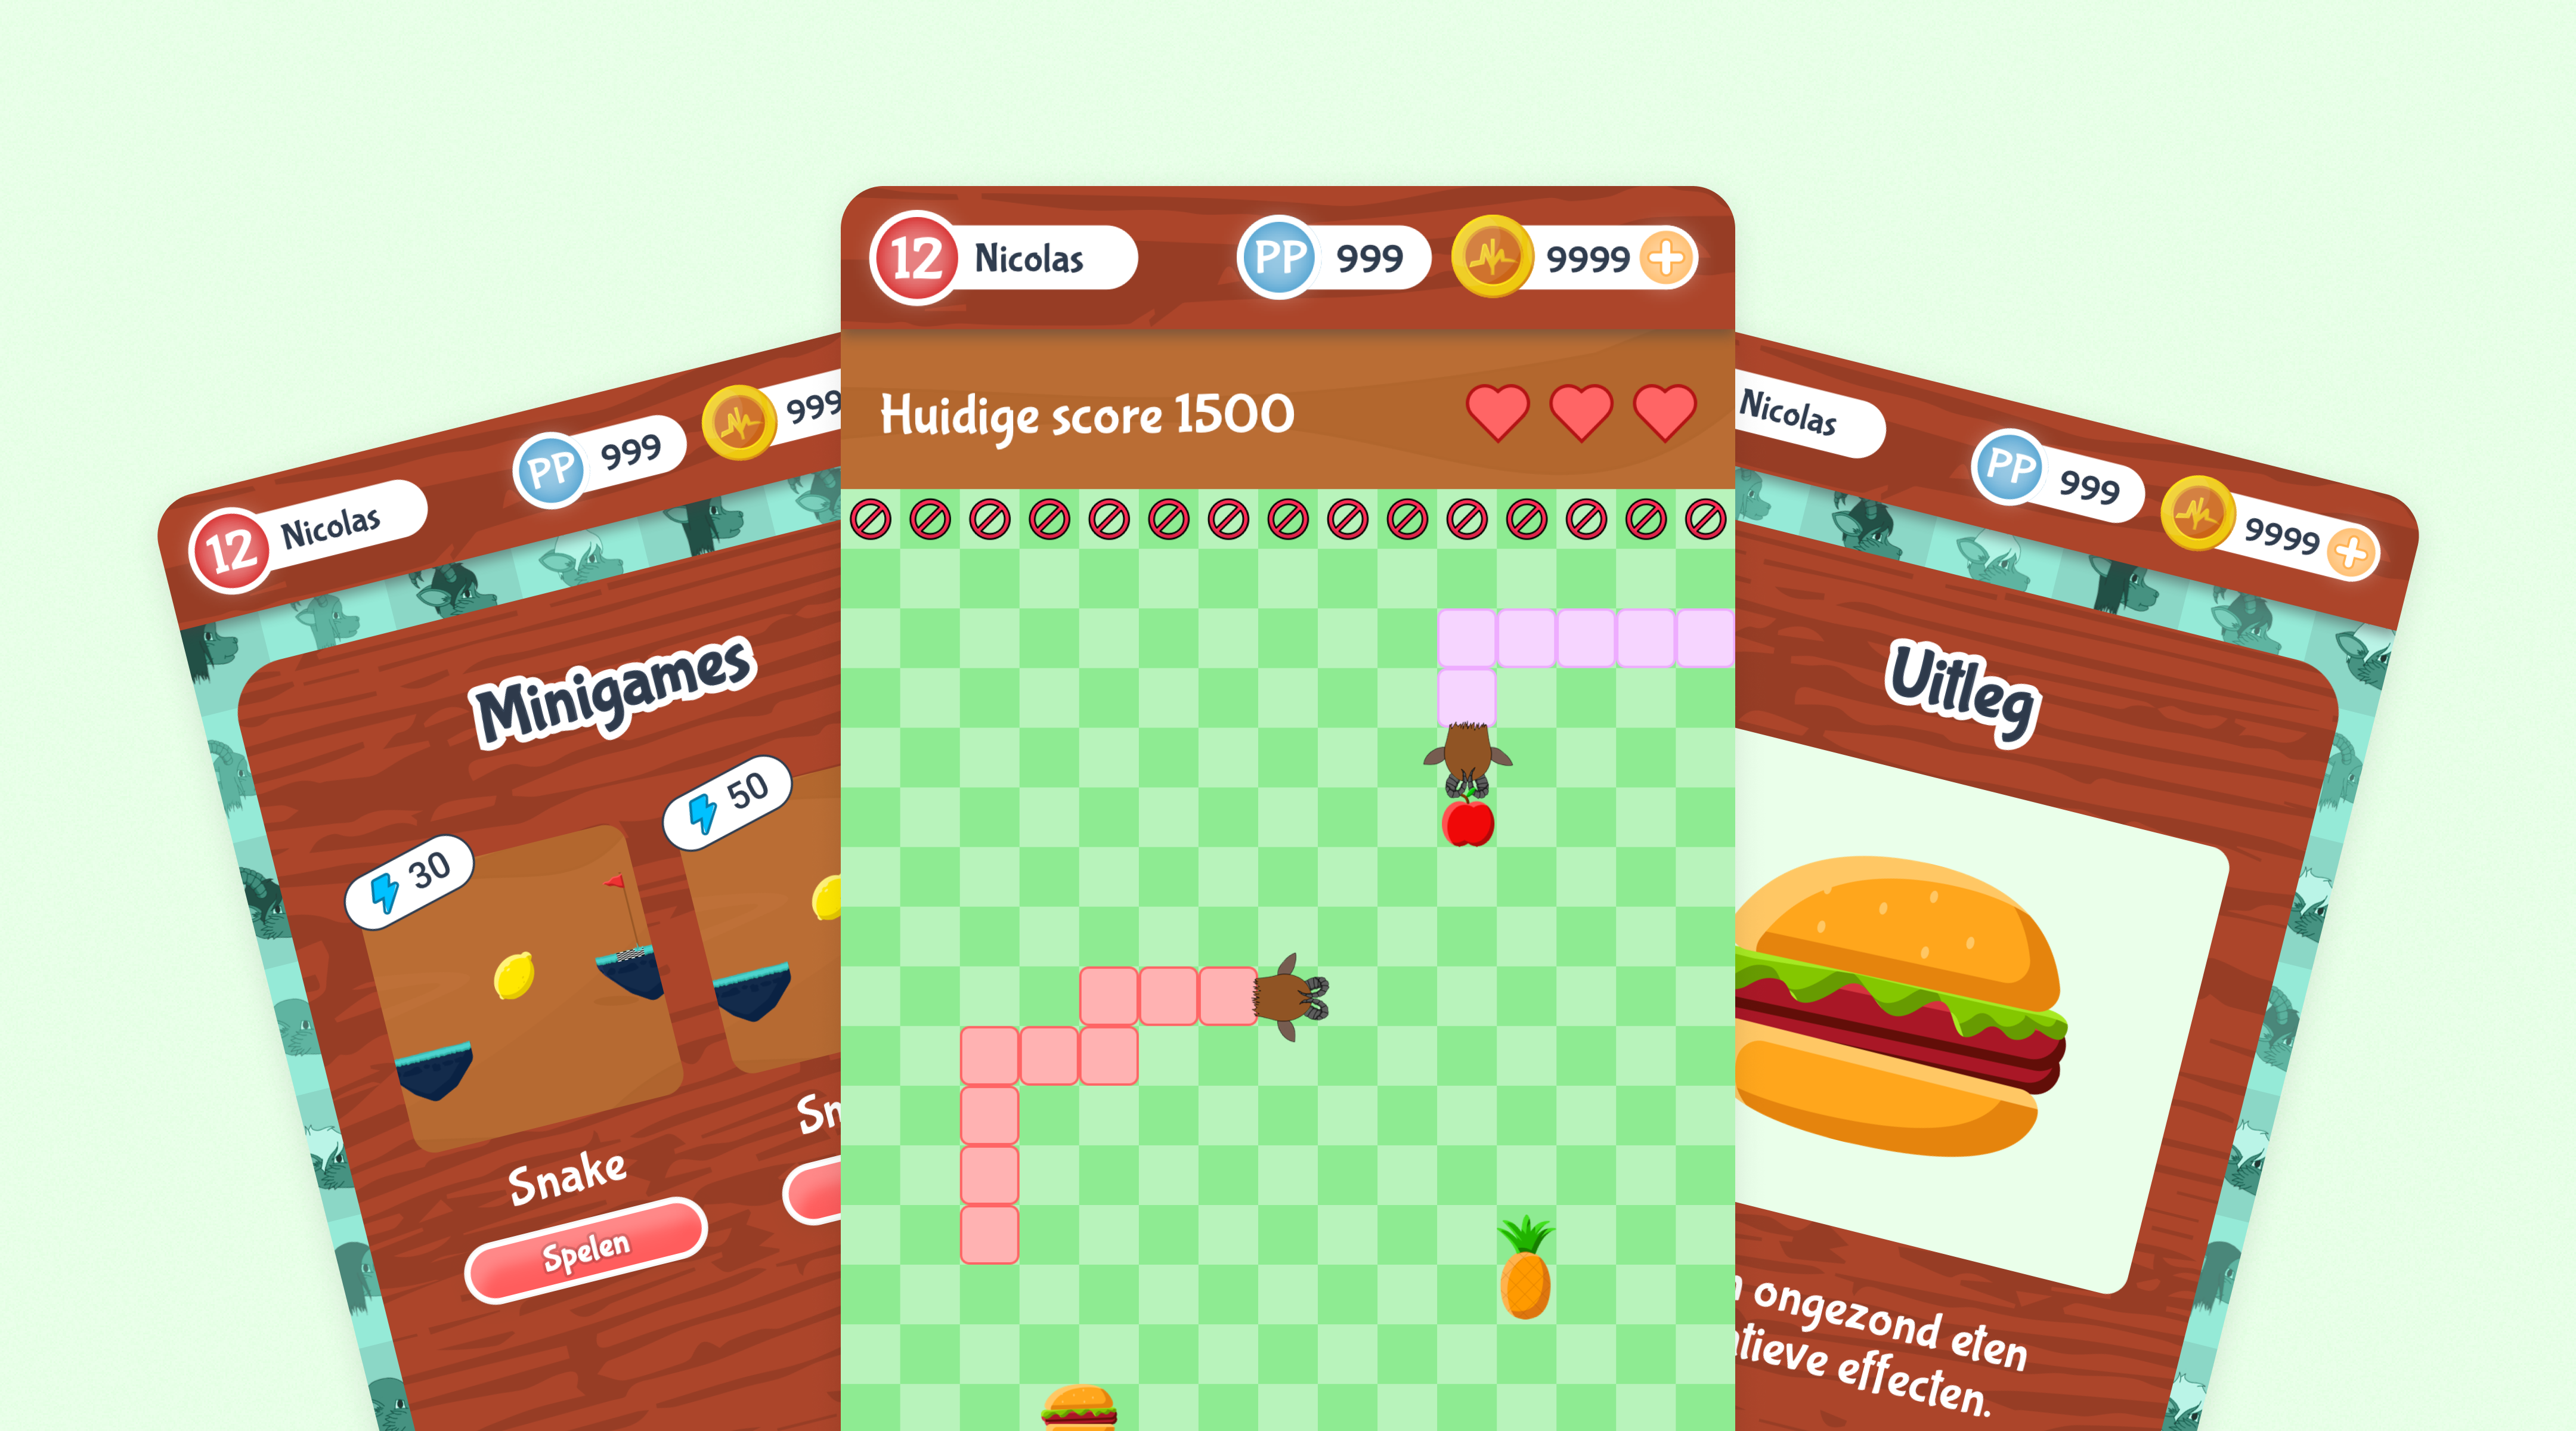 Shows the snake minigame with two players playing, also displays a explanation screen explaining that eating unhealthy food will give you negative points.